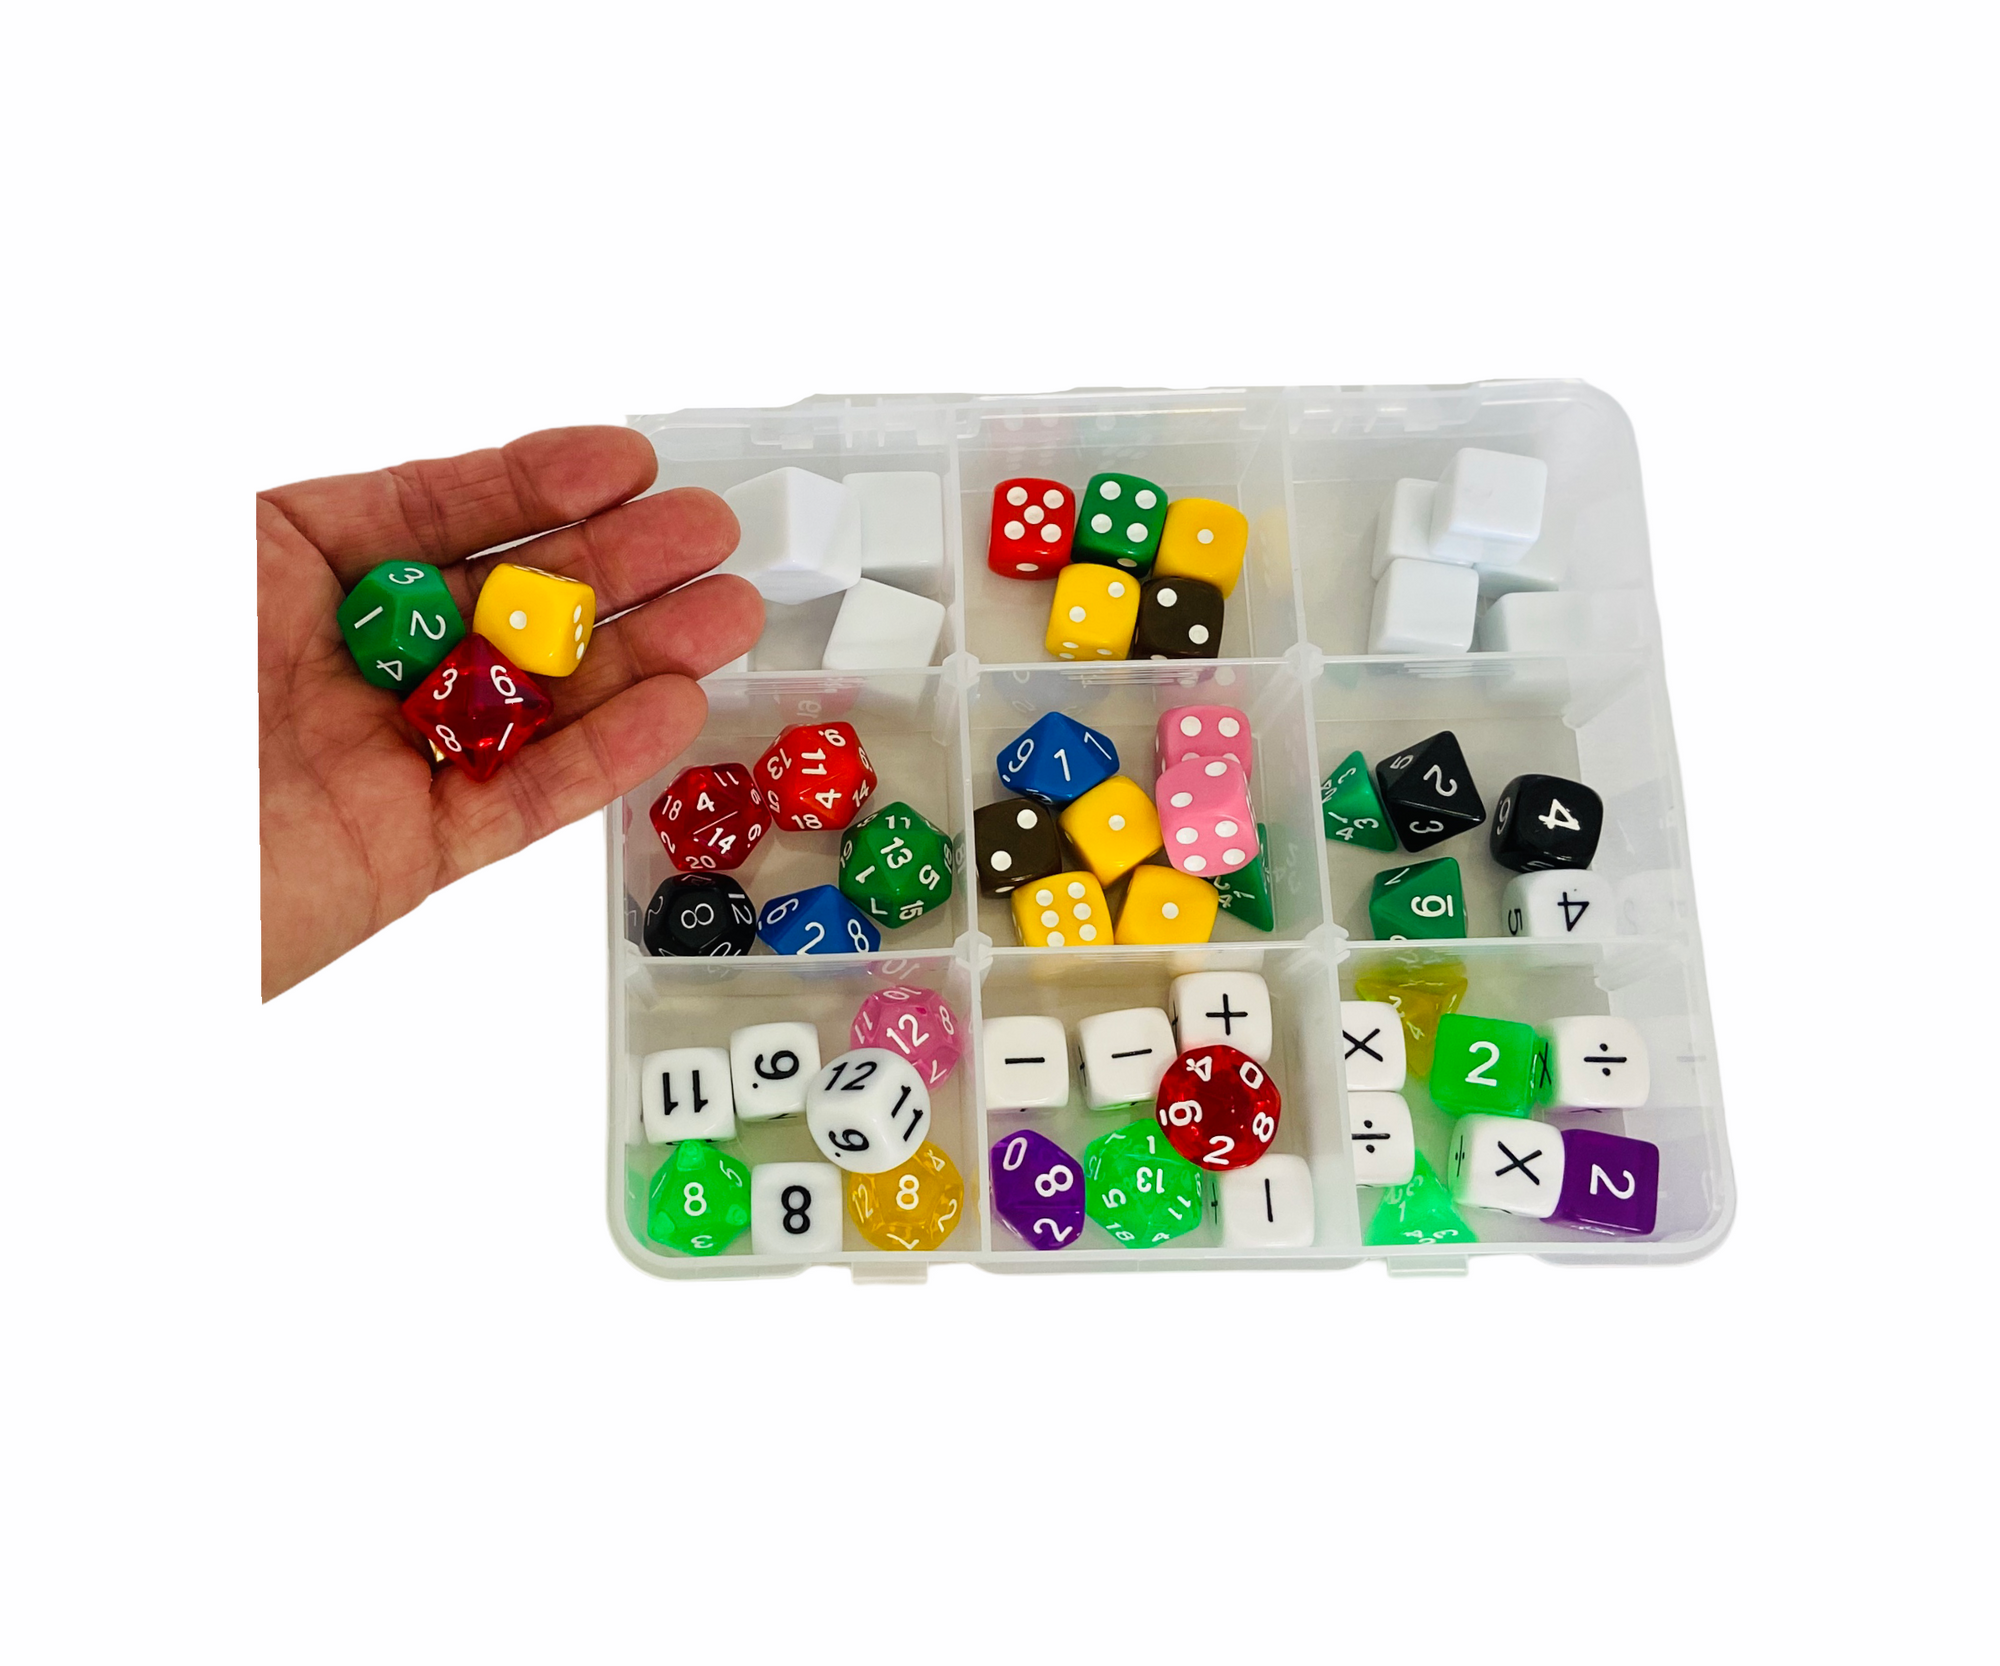 Dice Class Set displayed on white background with hand holding 3 coloured dice